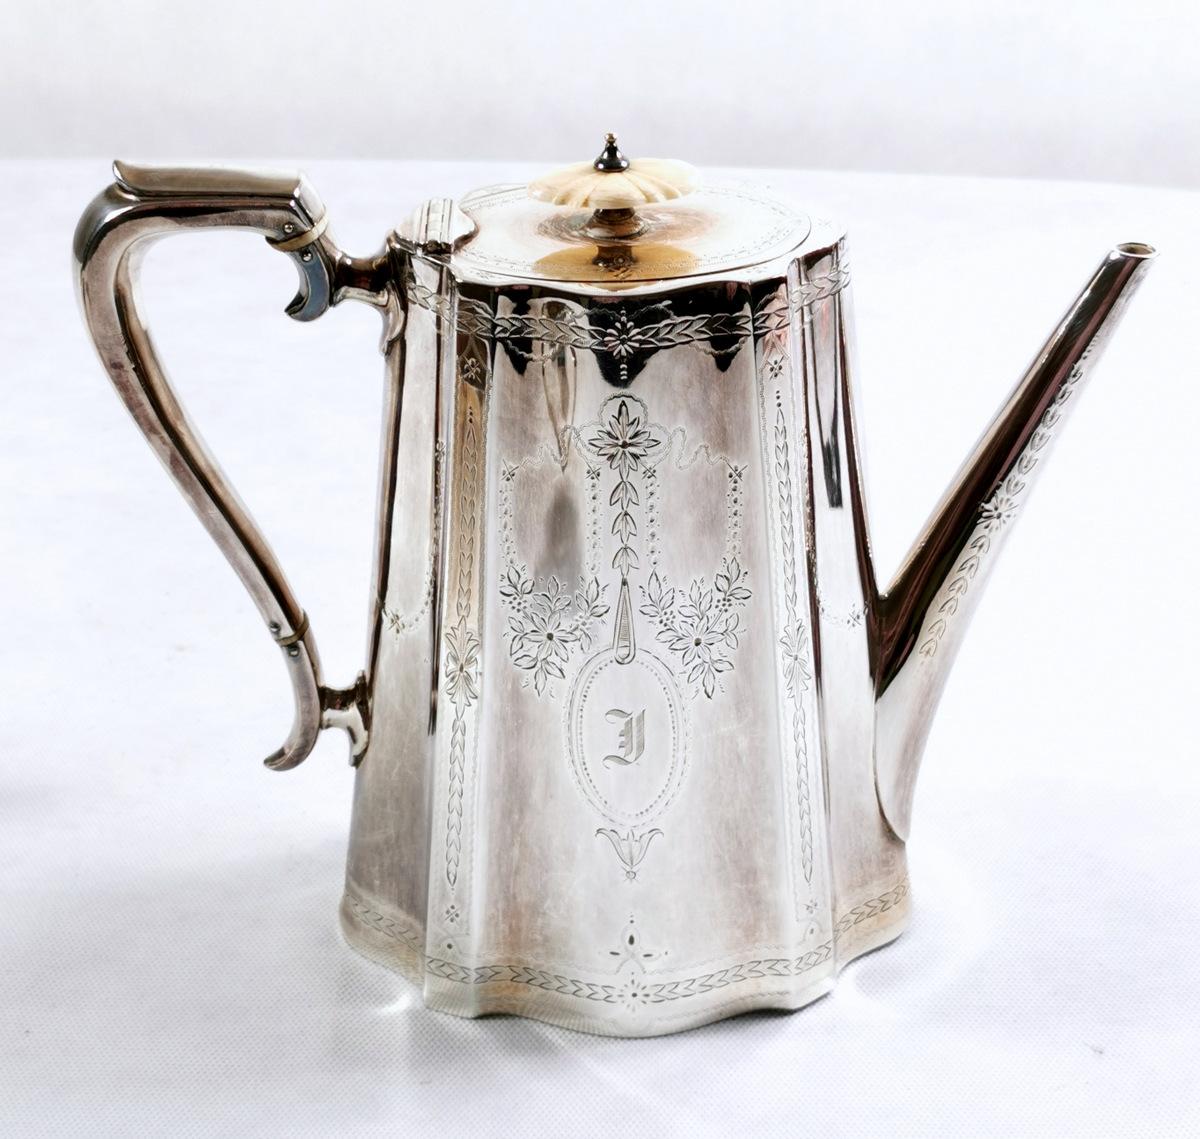 We kindly suggest you read the whole description, because with it we try to give you detailed technical and historical information to guarantee the authenticity of our objects.
Classic high-quality silver-plated tea and coffee set (Hard Metal), the